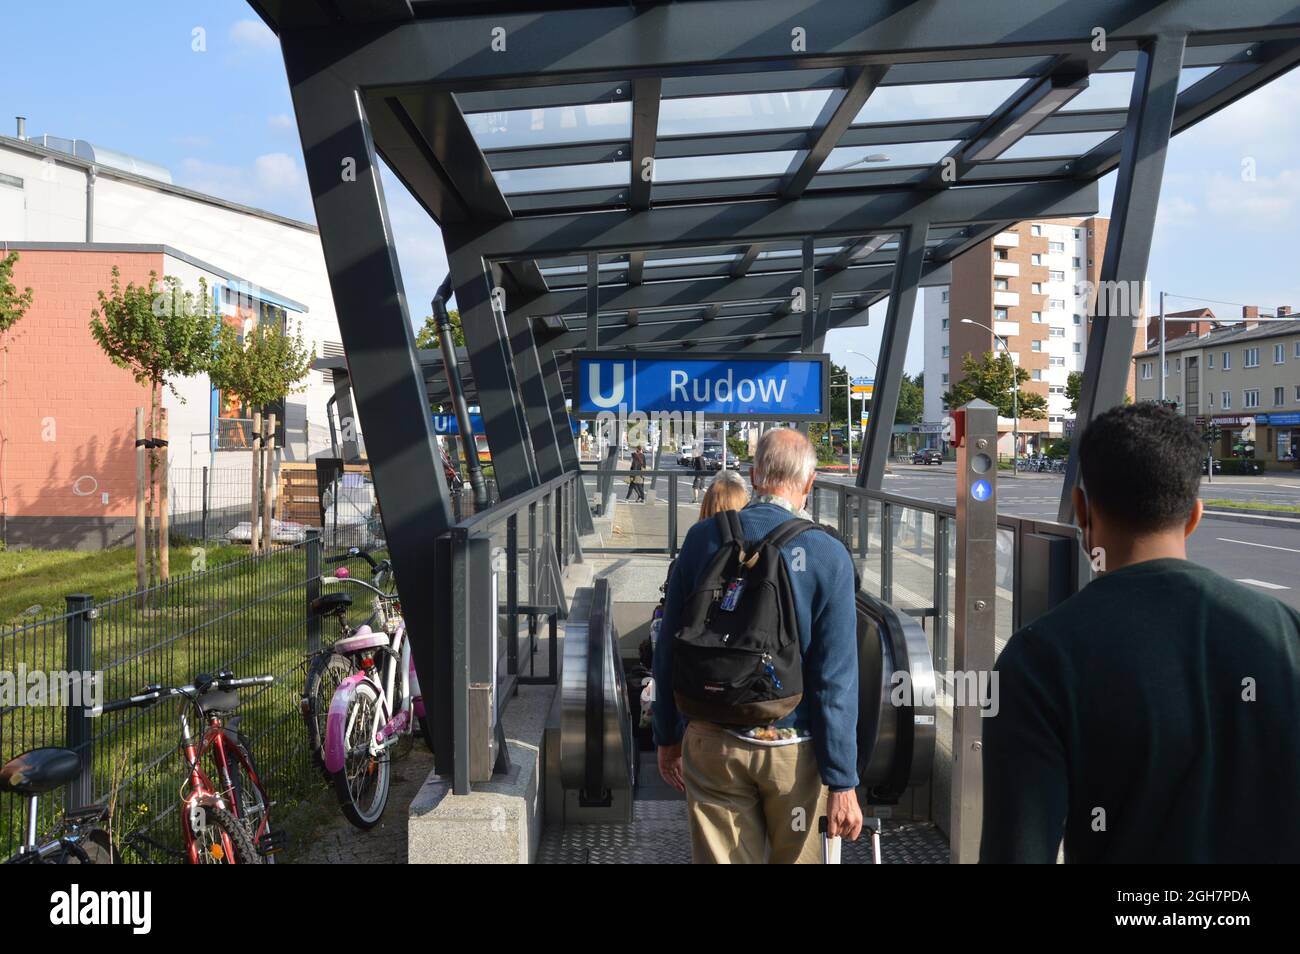 Entrance of Rudow subway station in Berlin, Germany - September 5, 2021. Stock Photo